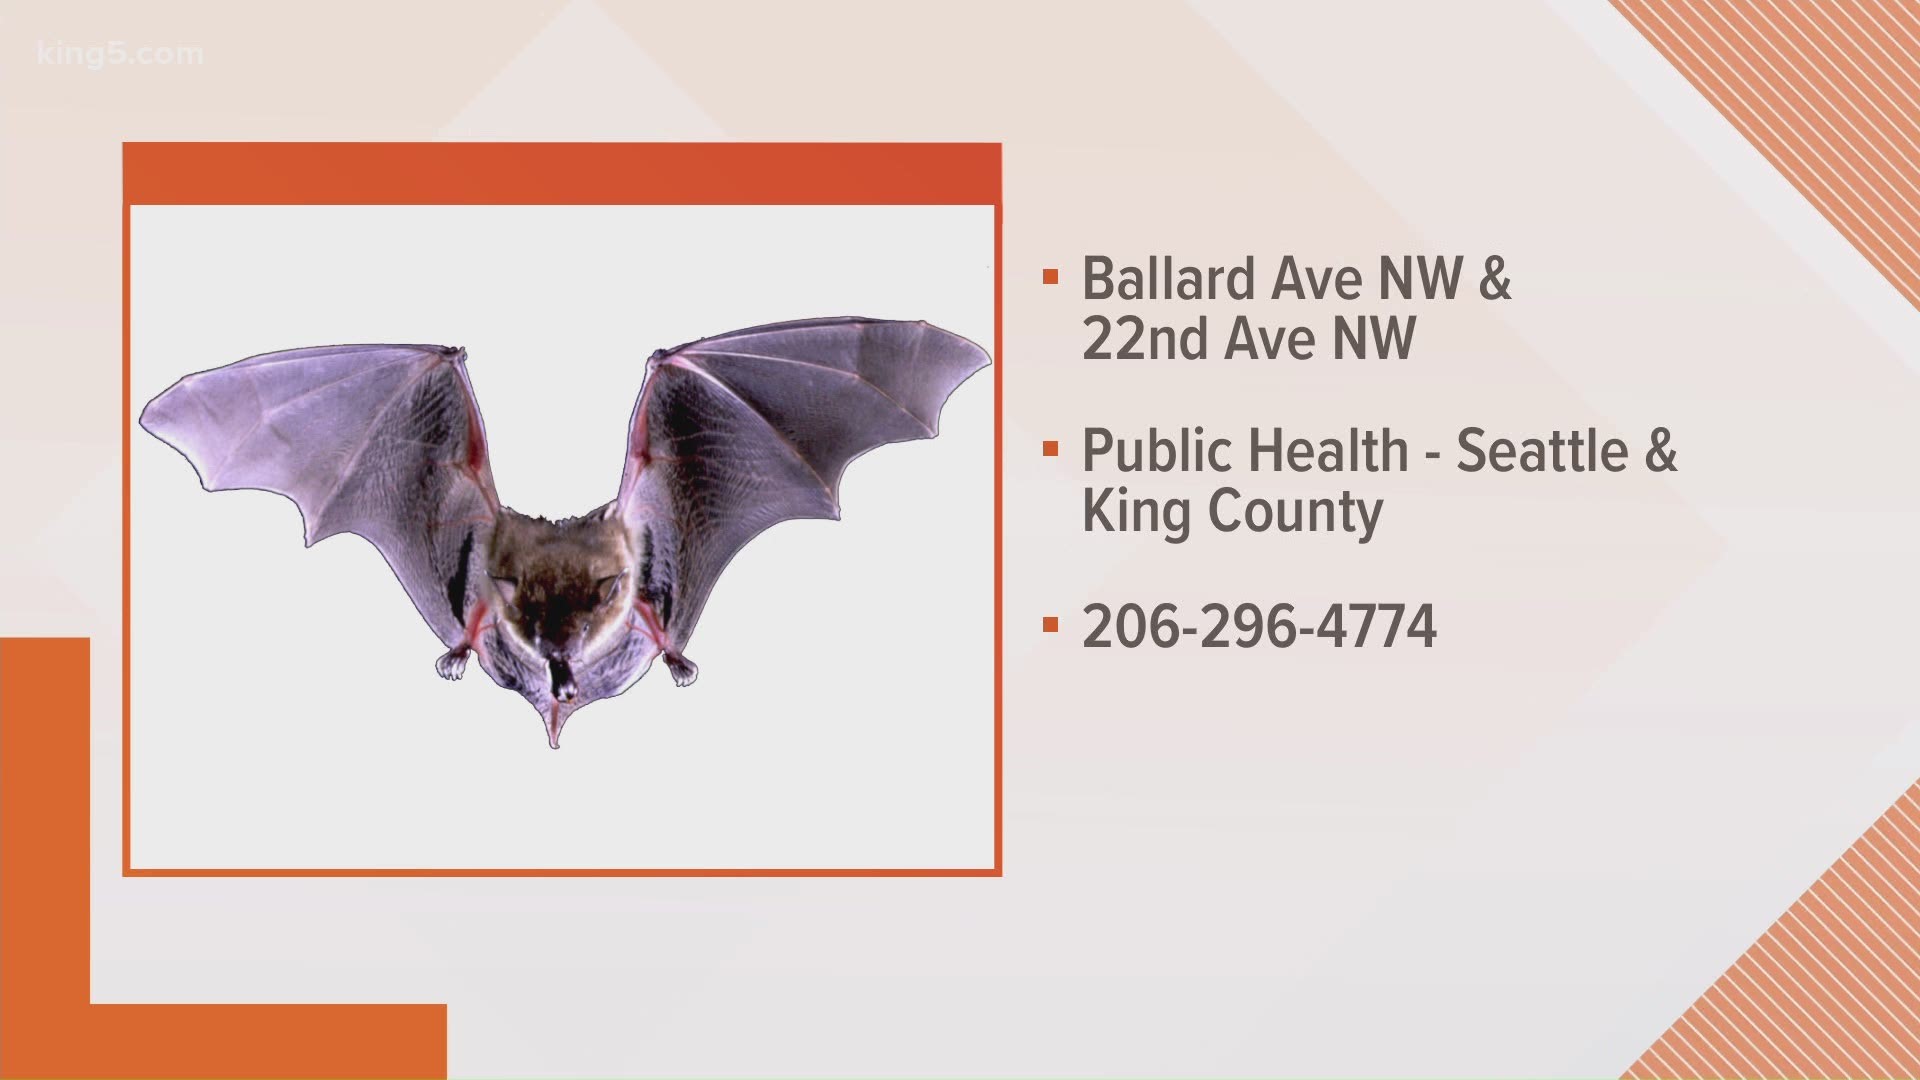 Health officials want anyone who has had a run-in with a rabid bat in Seattle's Ballard neighborhood to contact them.